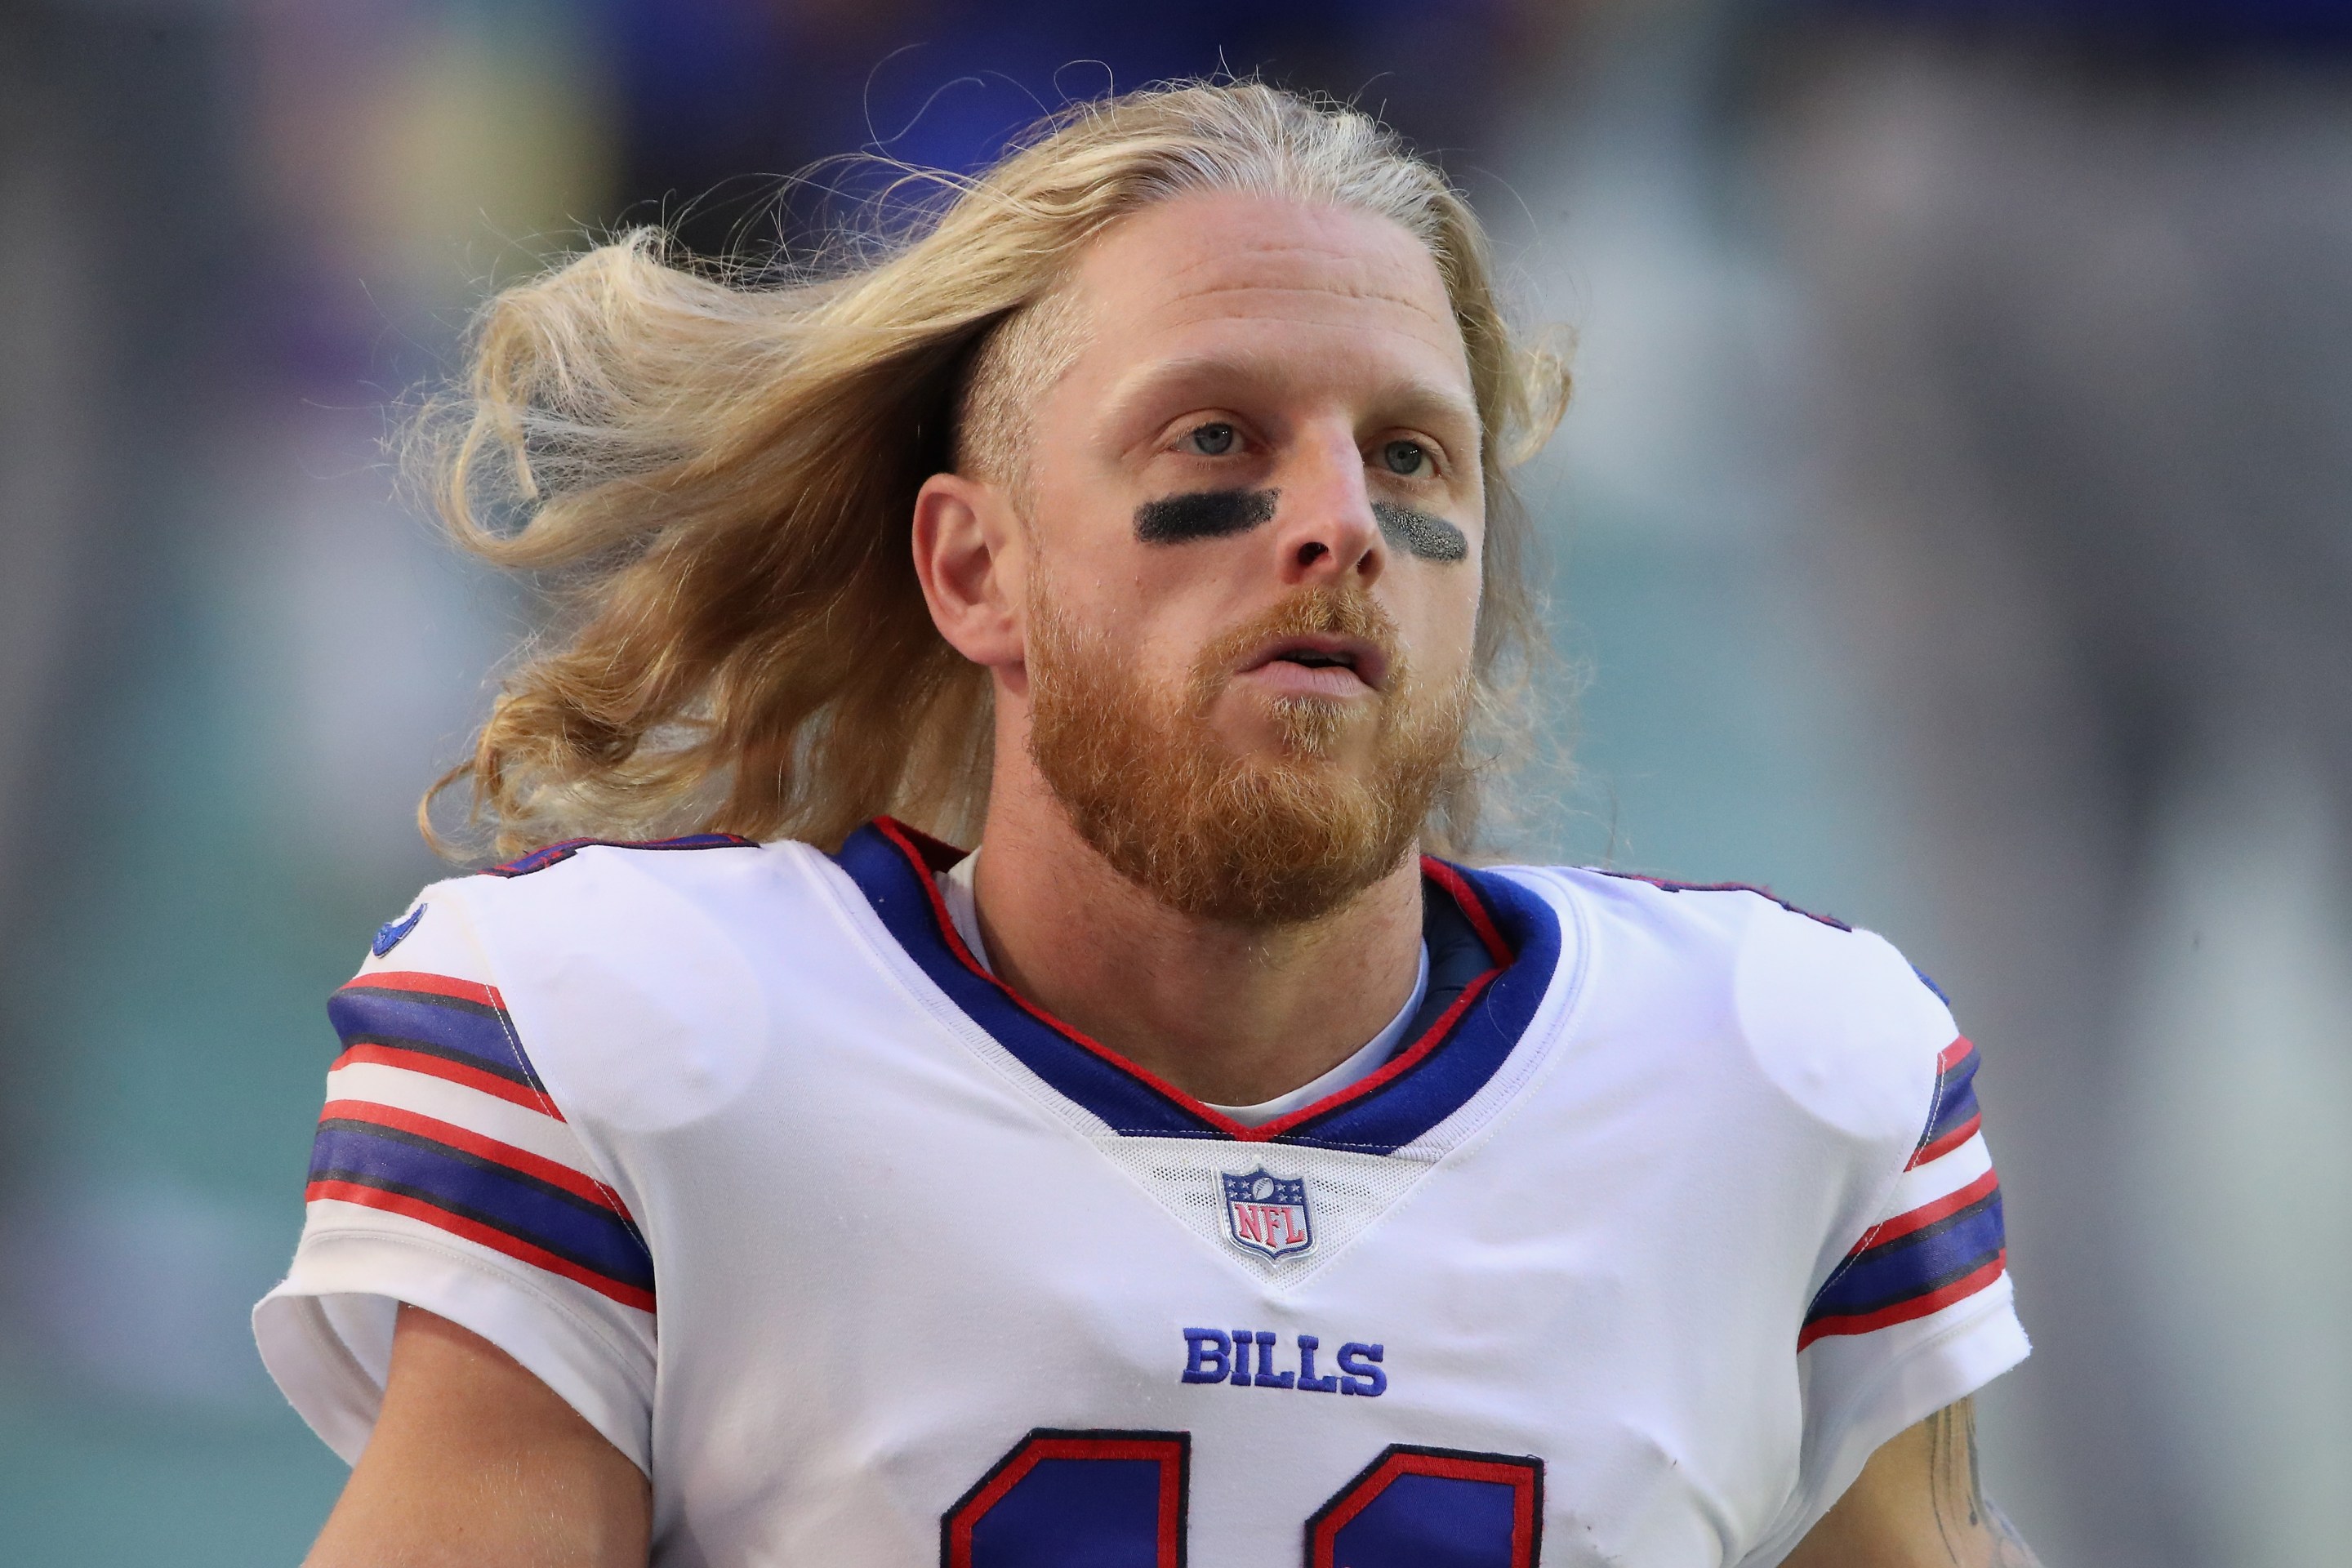 Cole Beasley looks super intense and tough.